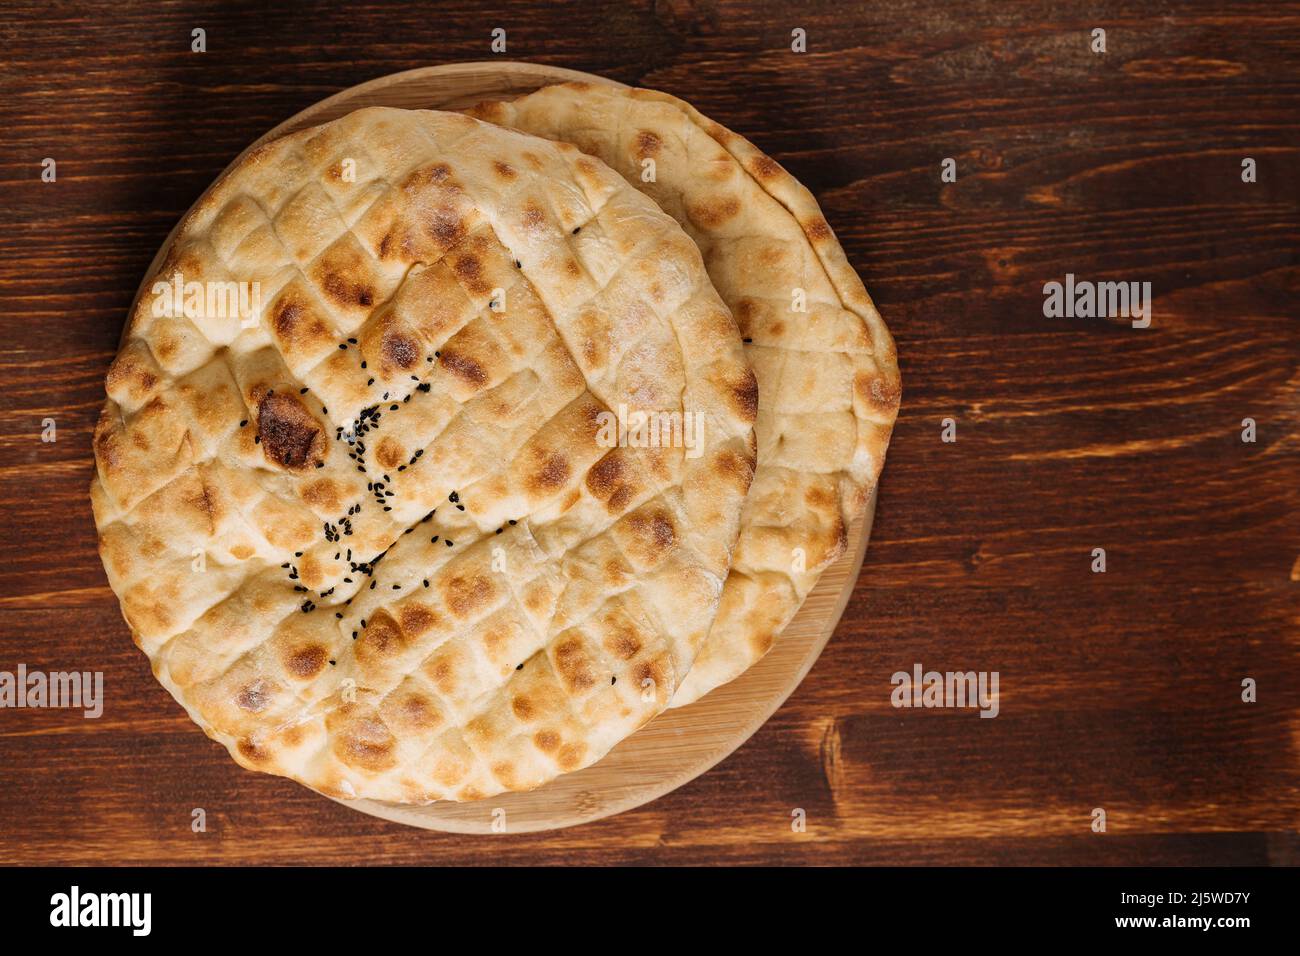 Top view of traditional Turkey or Bosnian pita bread called Somun or Lepina. Popular bread to eat during the month of Ramadan or Eid Mubarak. Rustic w Stock Photo